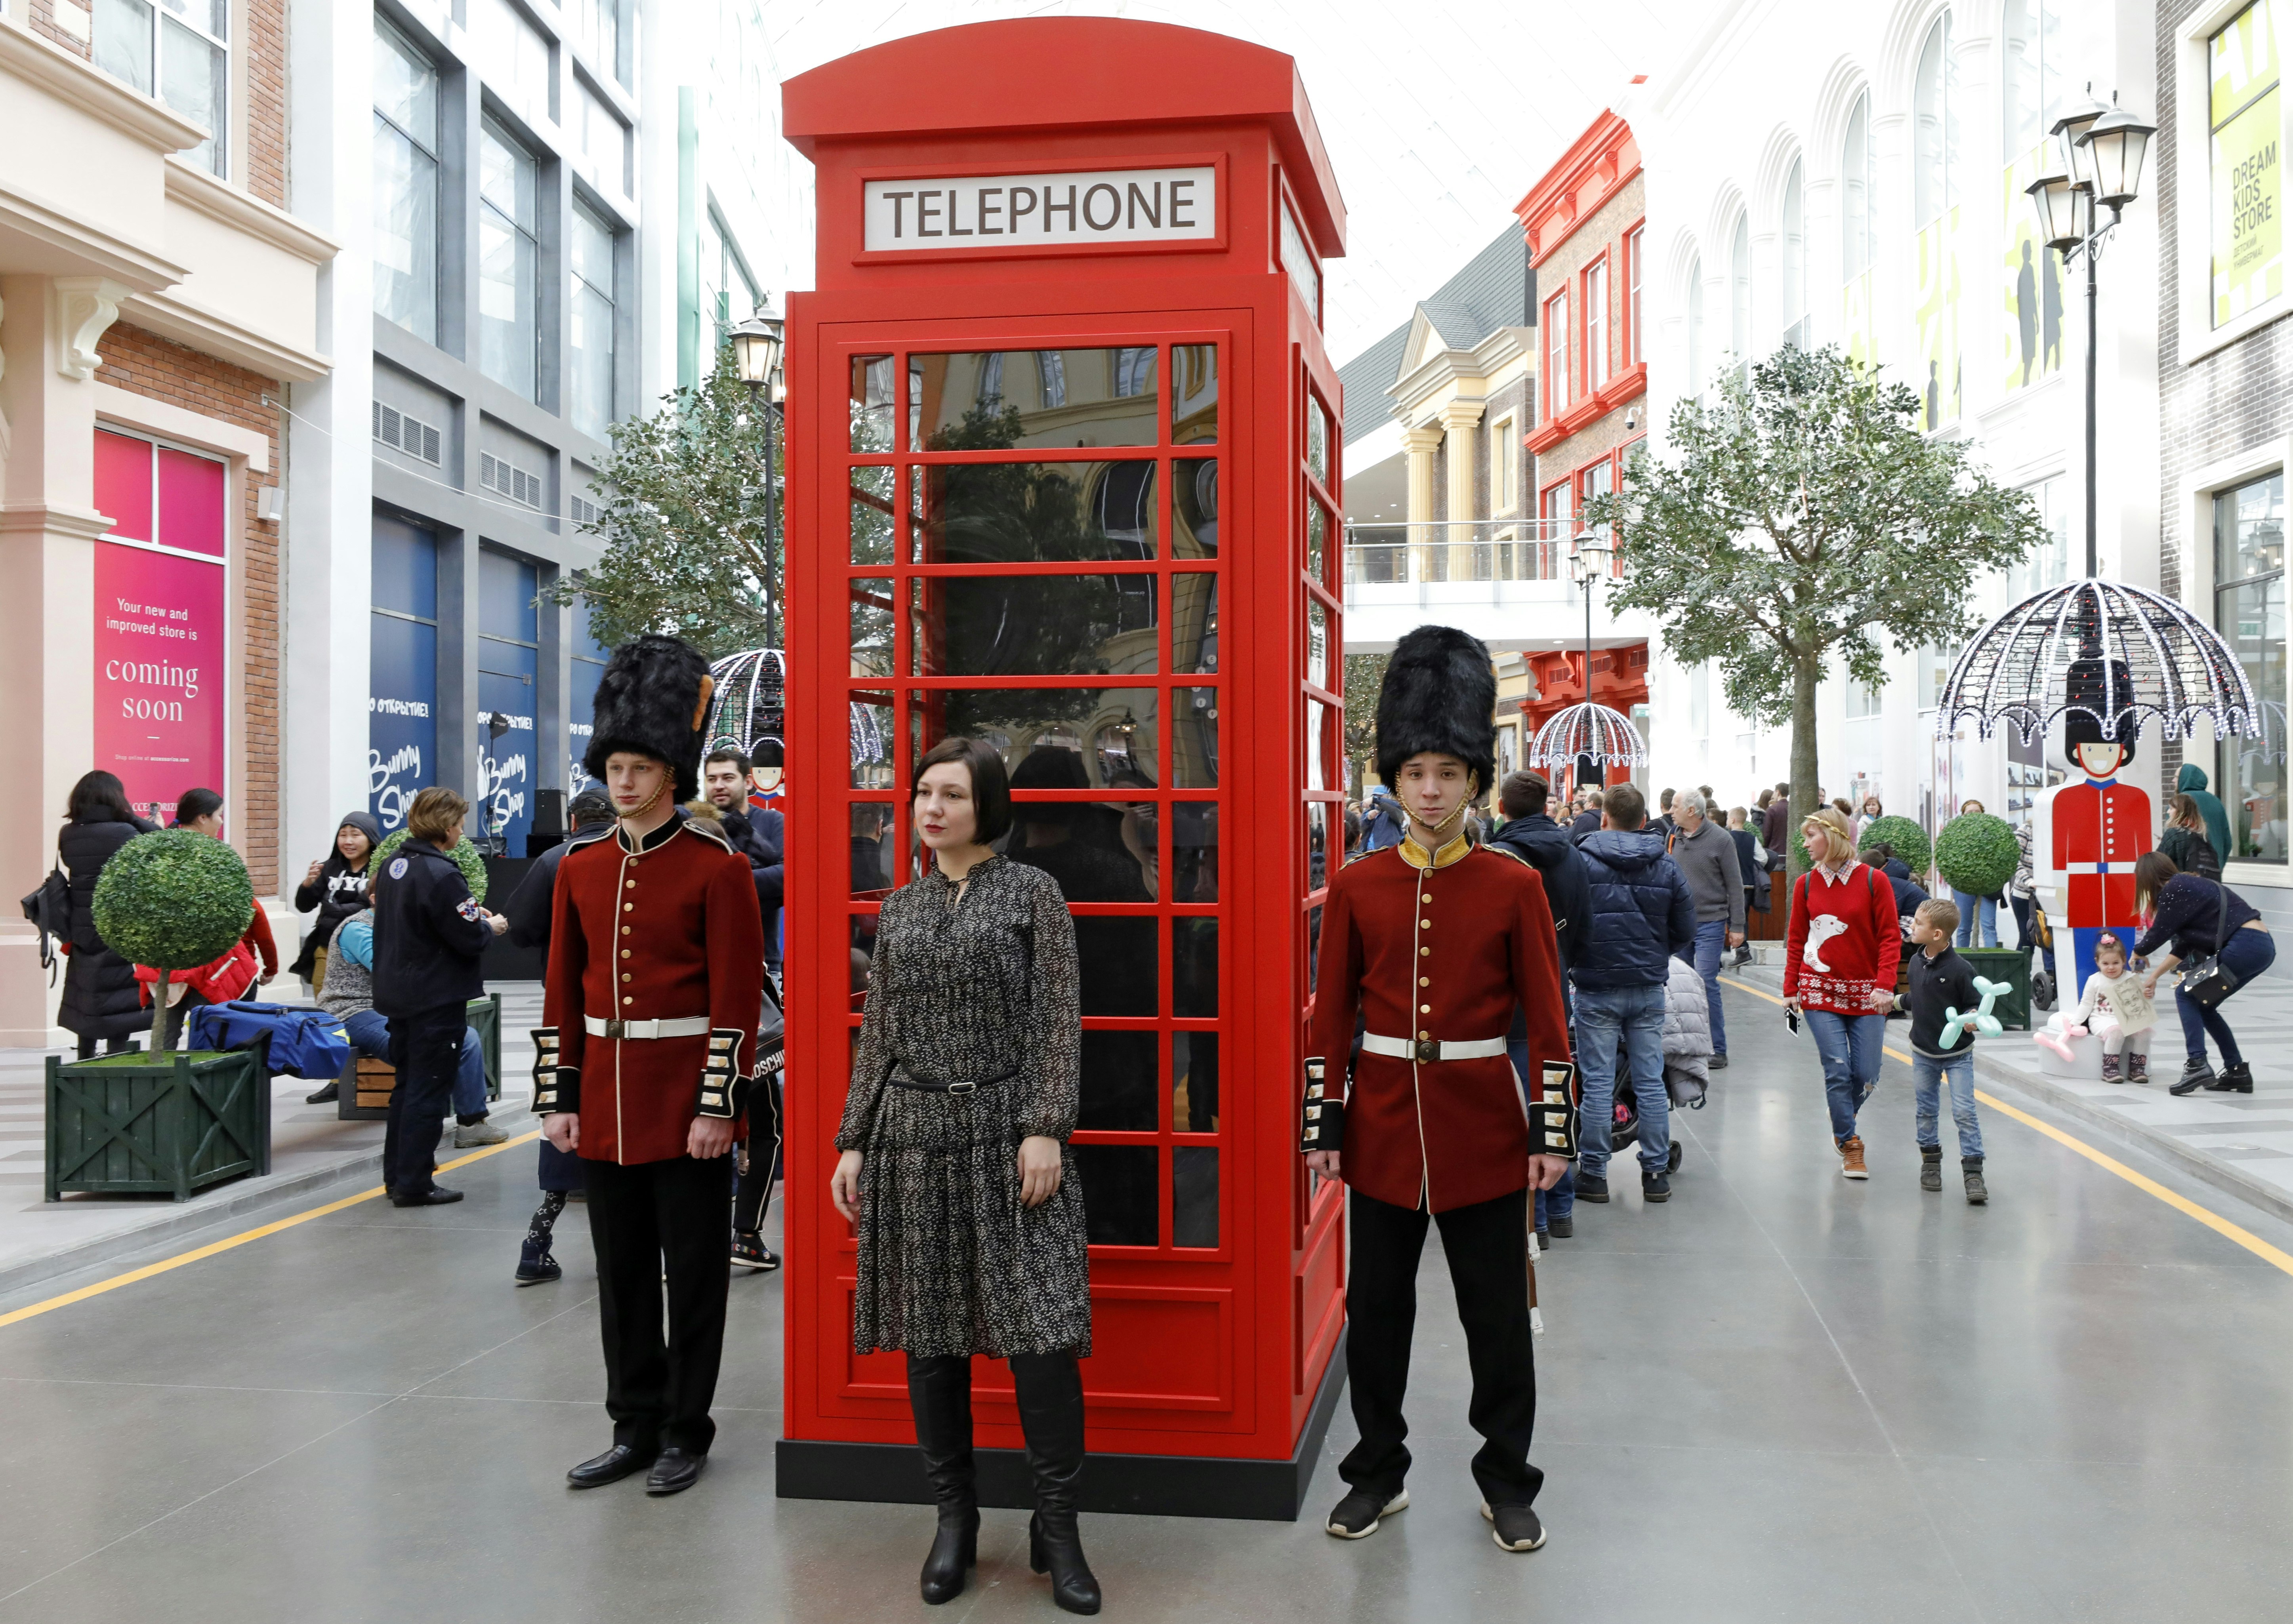 A traditional London phone box and royal guards at an indoor theme park